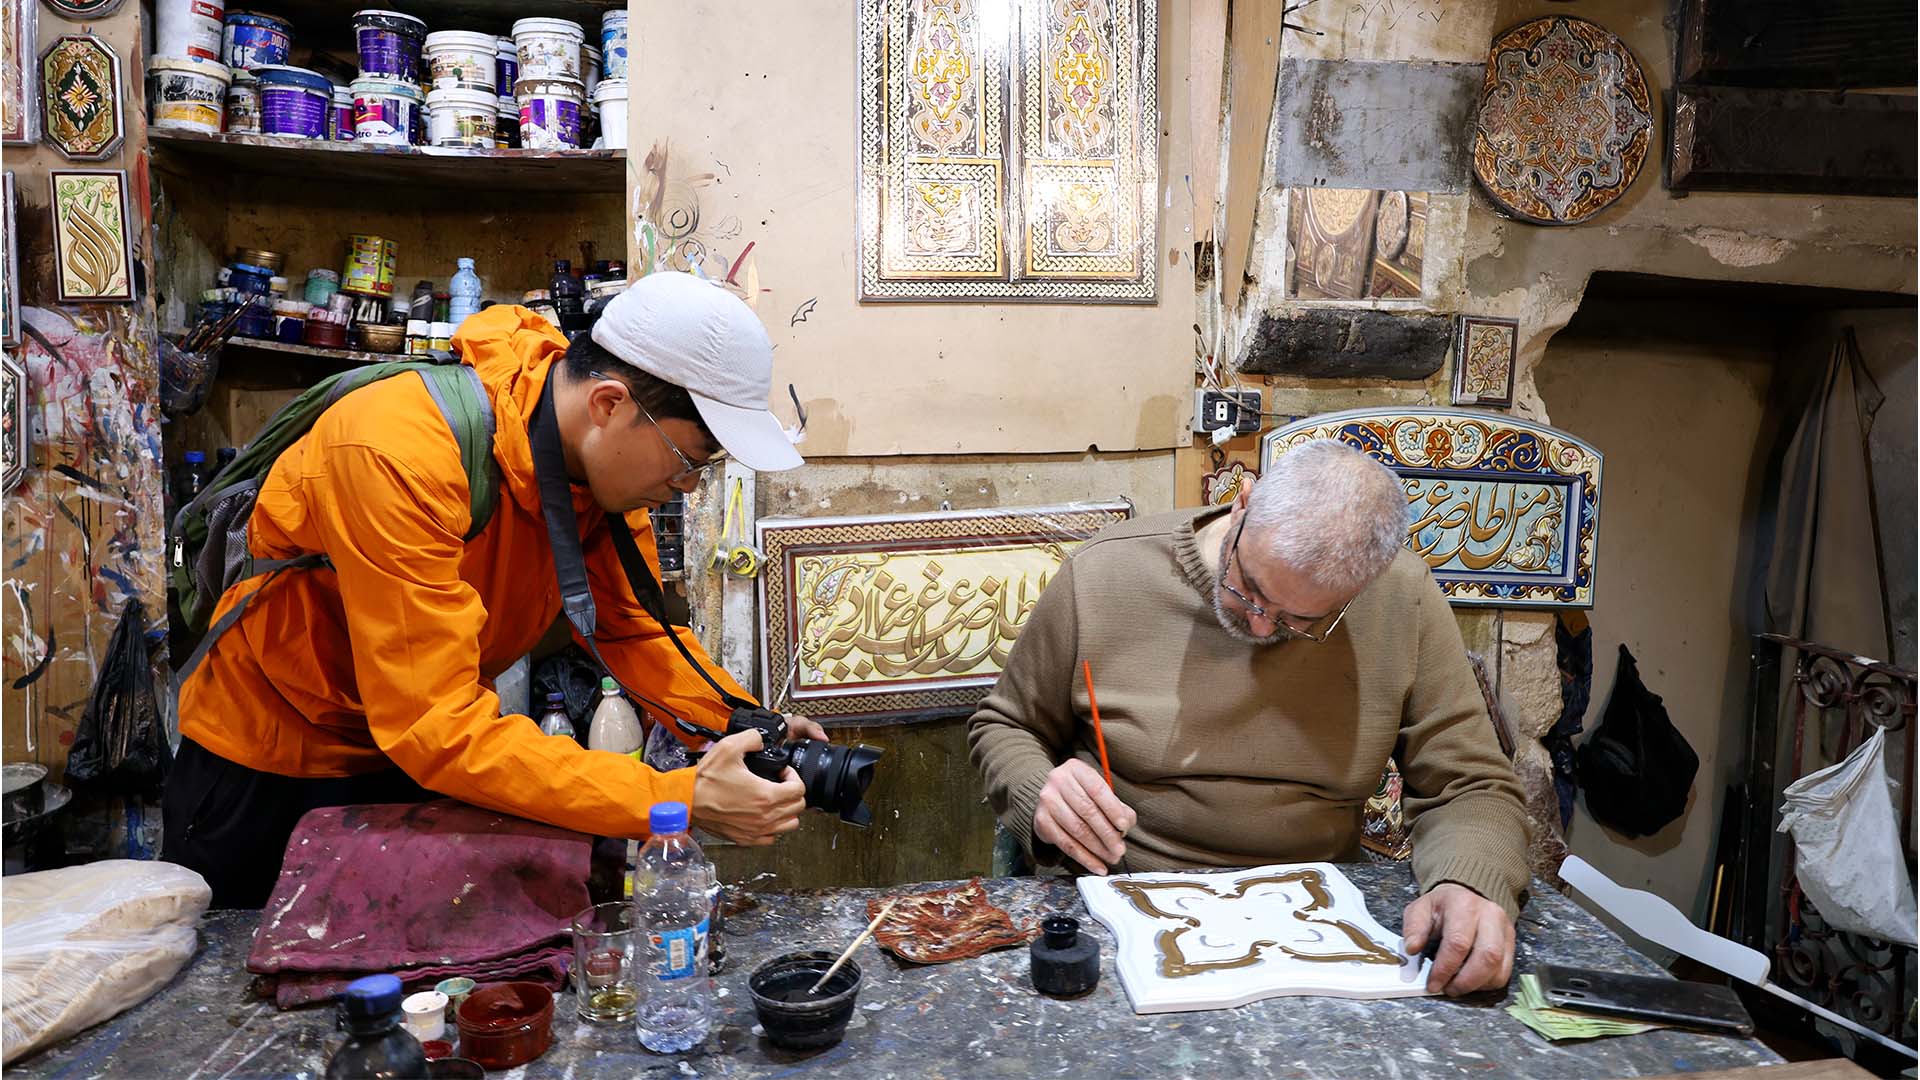 A tourist is capturing photographs of a skilled craftsman from Syria, showcasing the profound Handicraft Heritage of Syria.